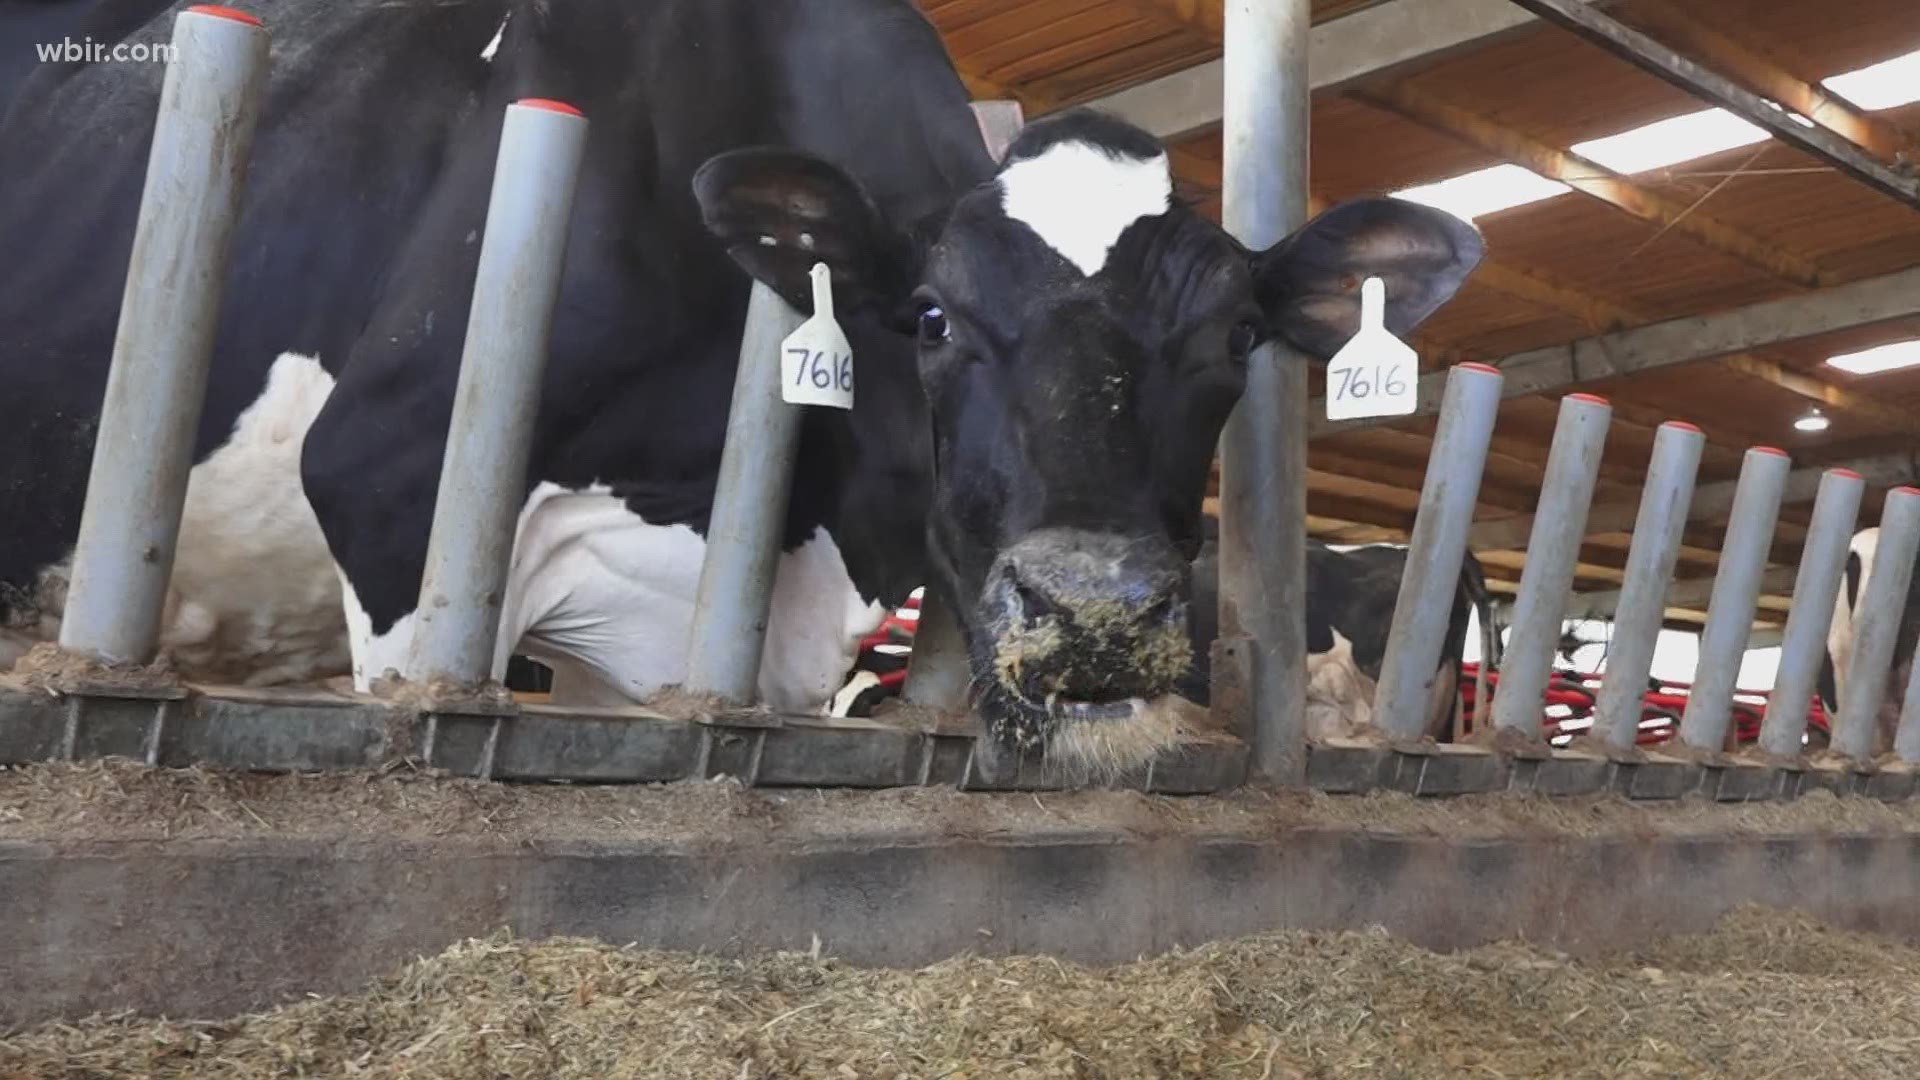 About one third of the cows at Sweetwater Valley Farm are milked using robots.